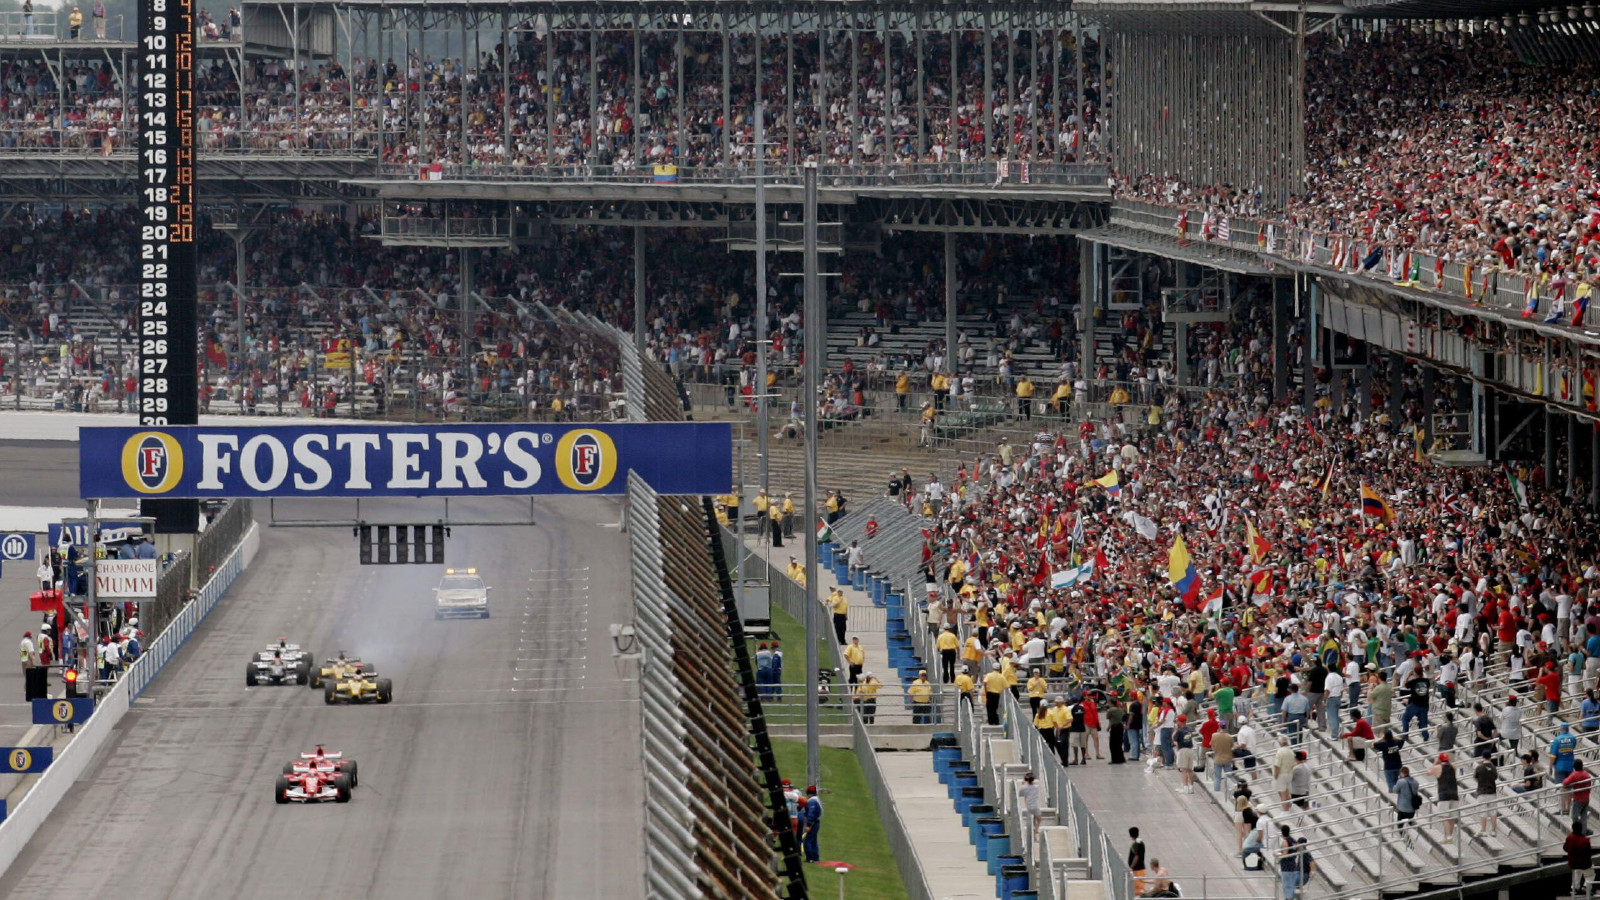 F1's most controversial races: The 2005 United States Grand Prix